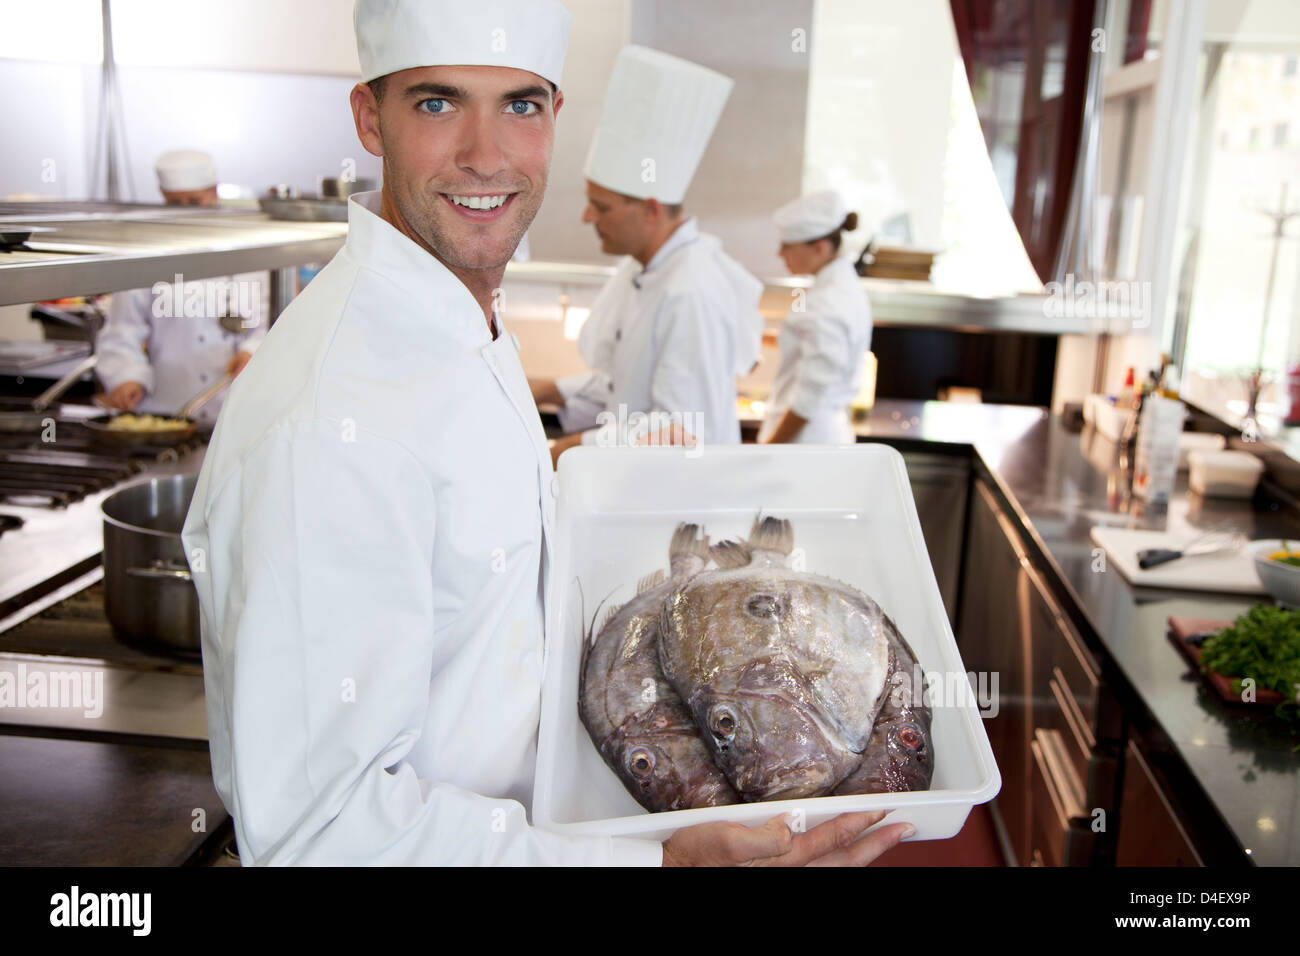 Chef carrying tub of fresh fish in restaurant kitchen Stock Photo